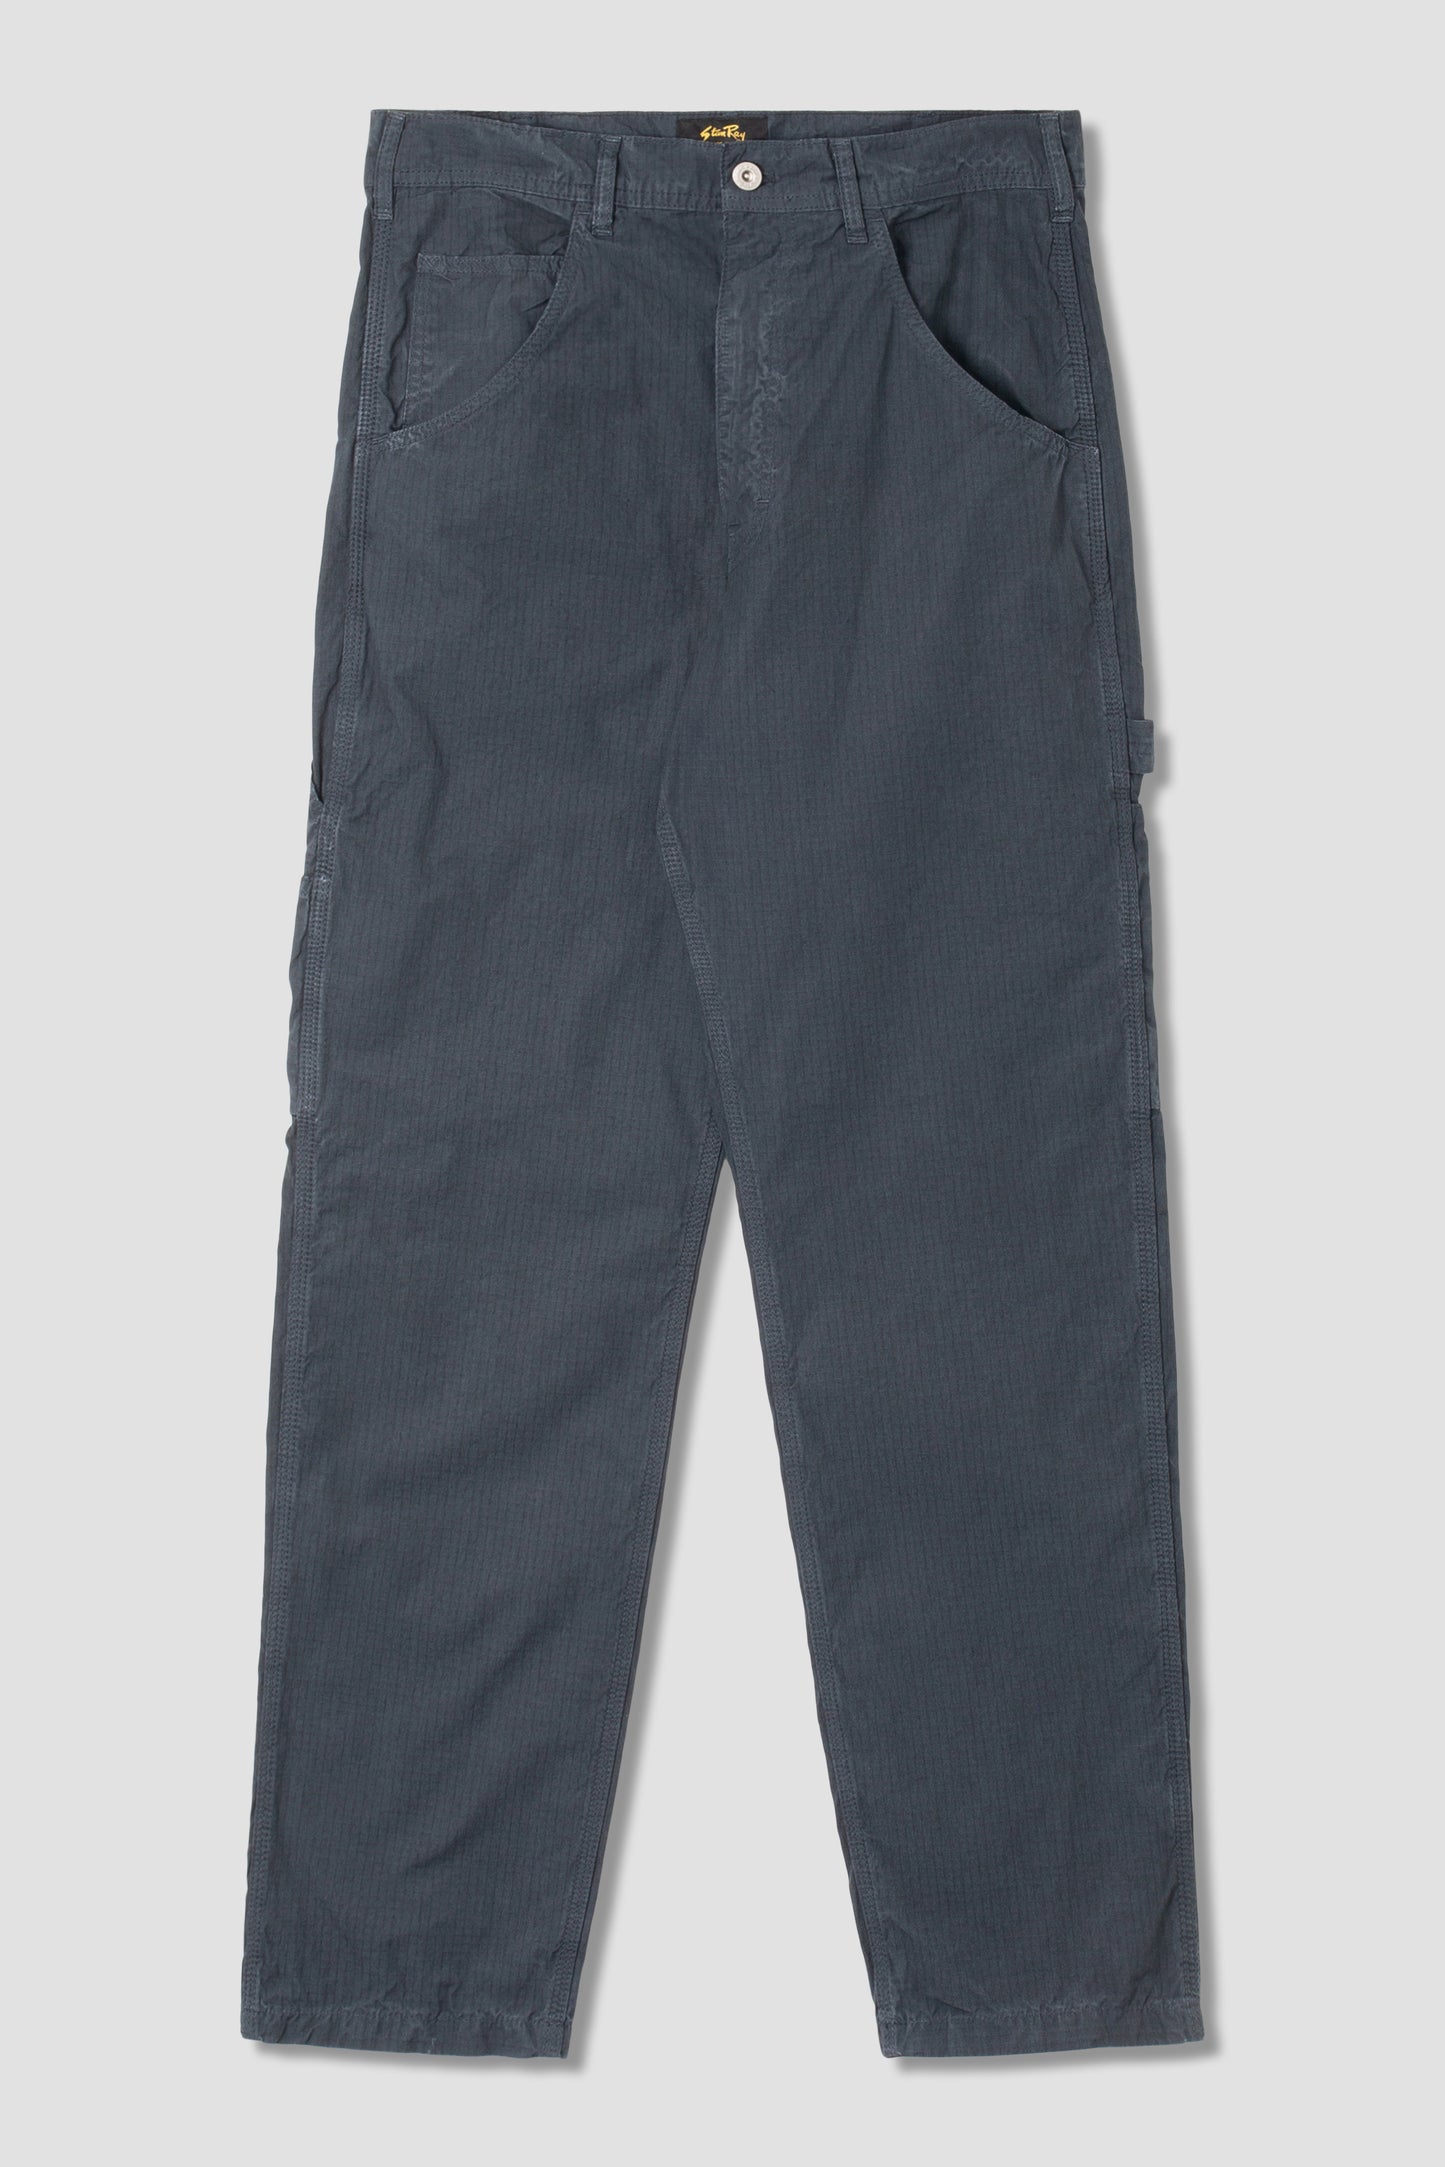 80s Painter Pant (Navy Ripstop)